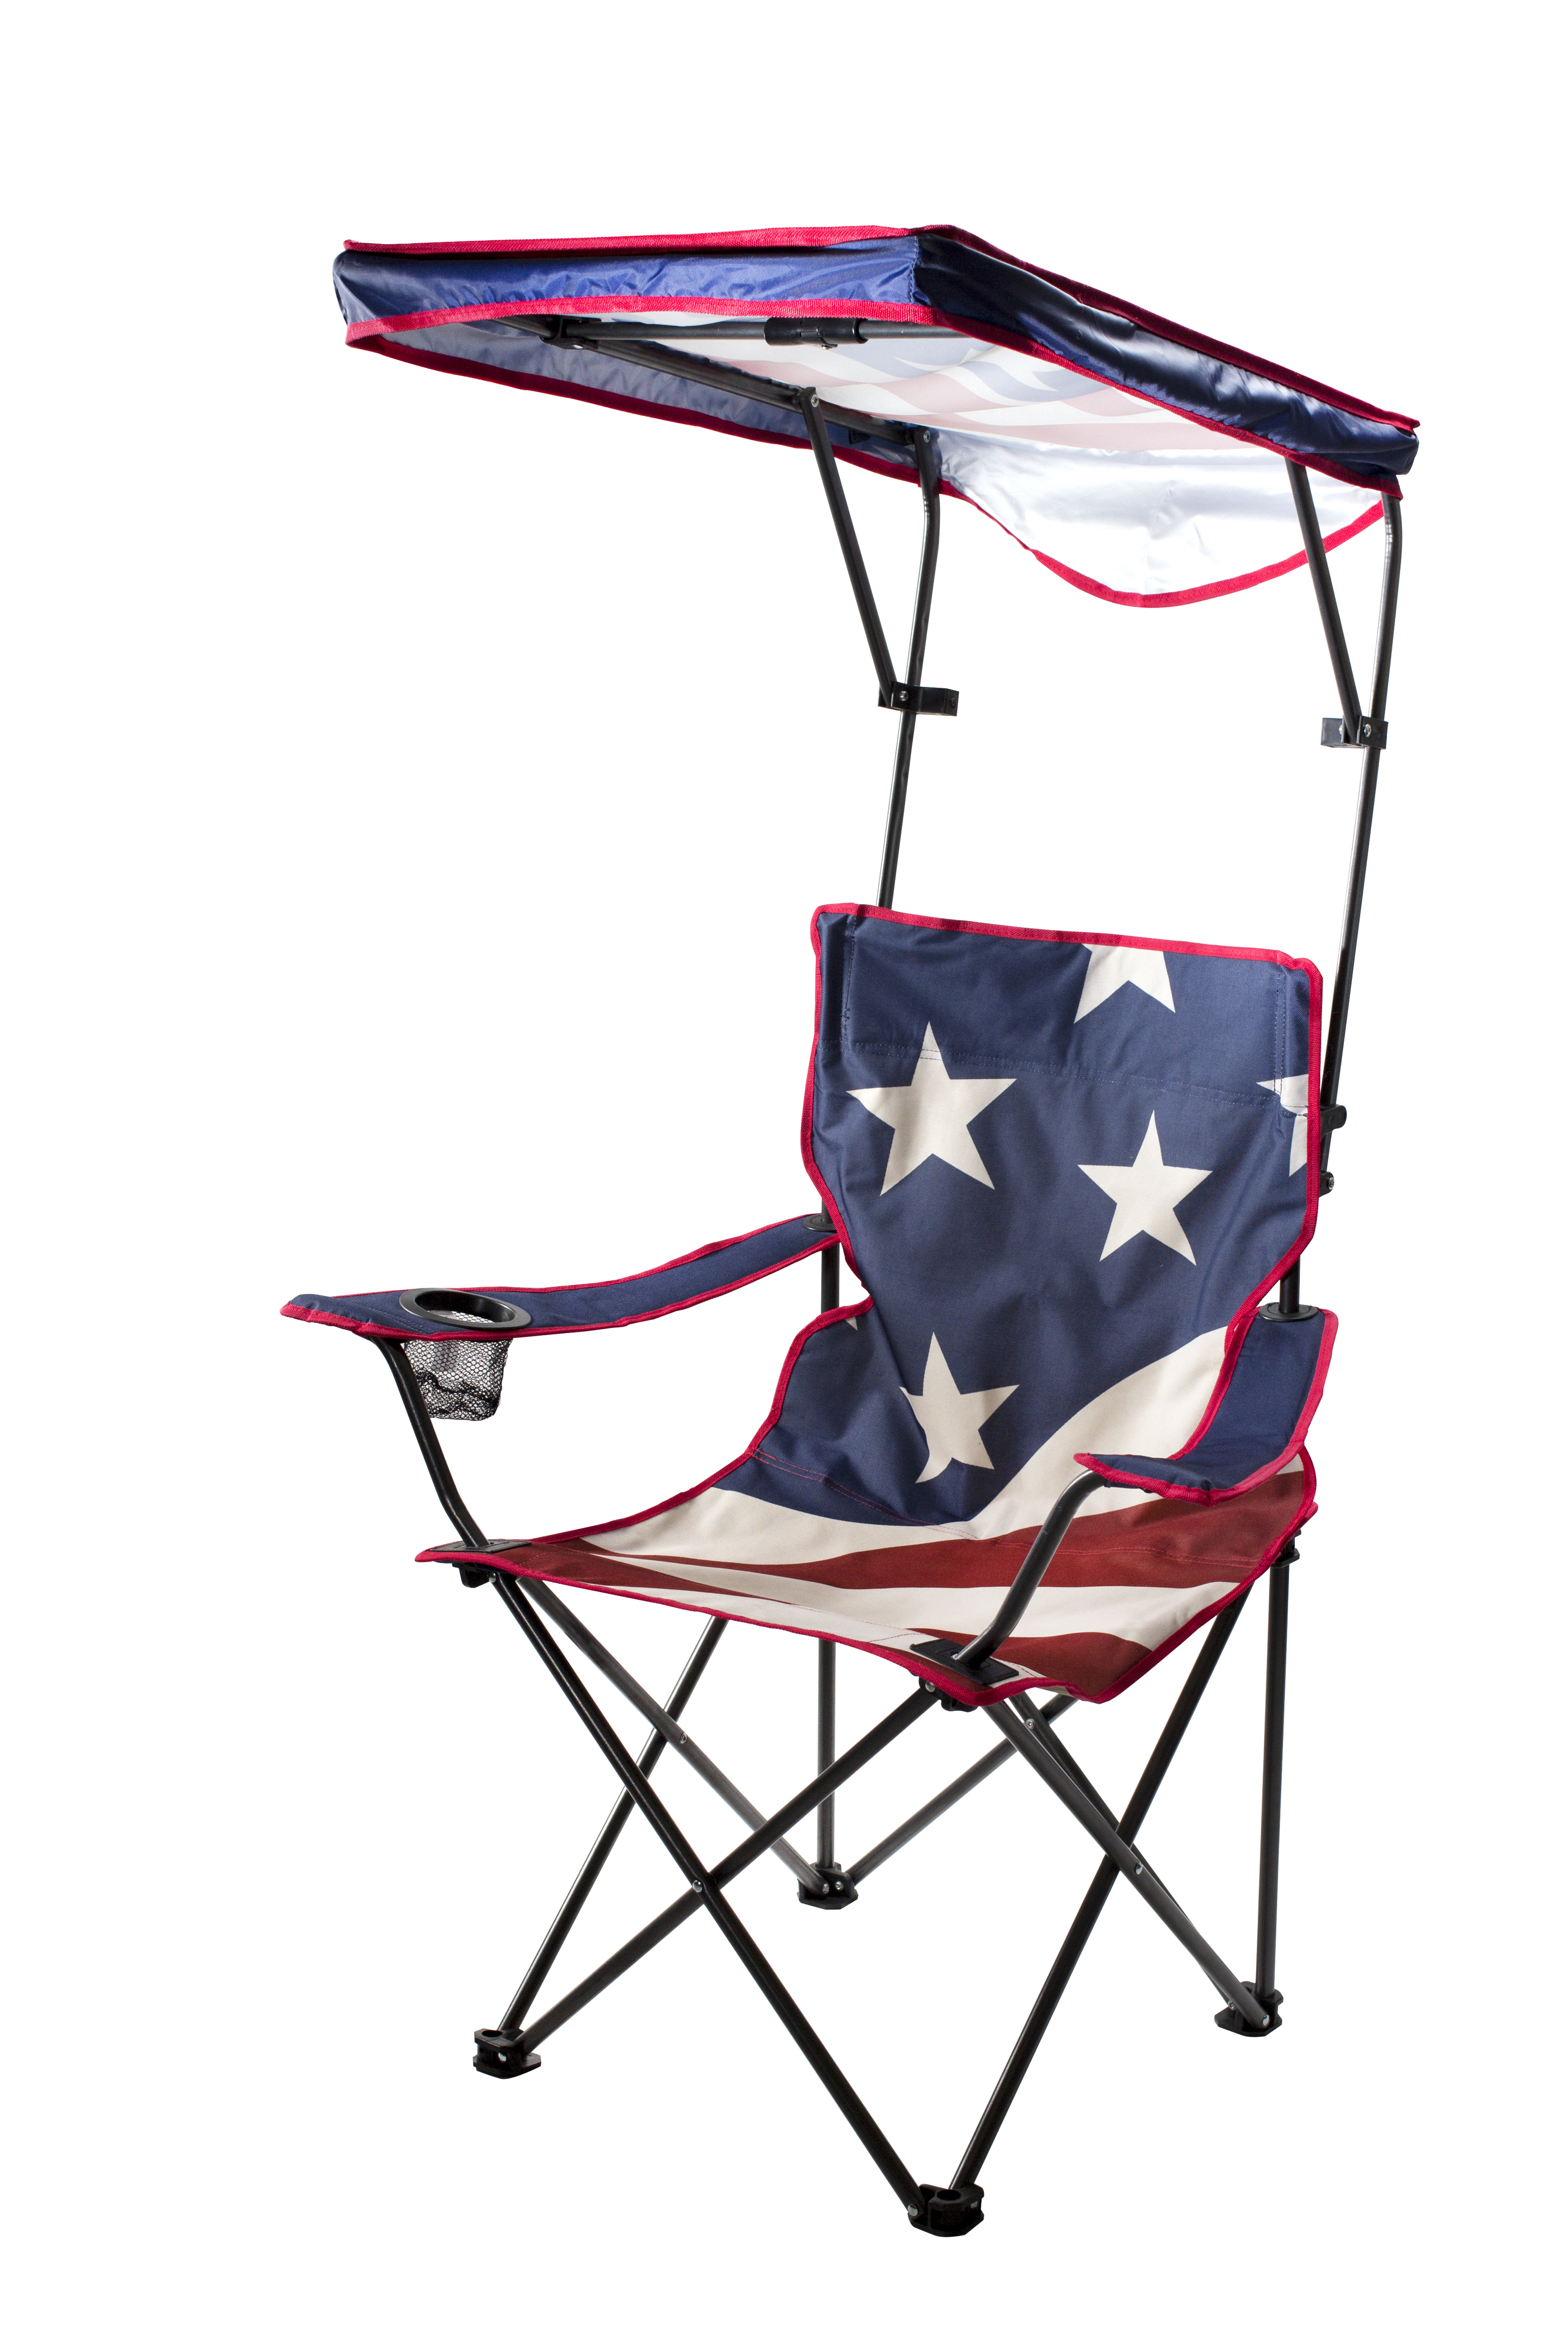 Quik Shade Canopy Camp Chair - American Flag Pattern